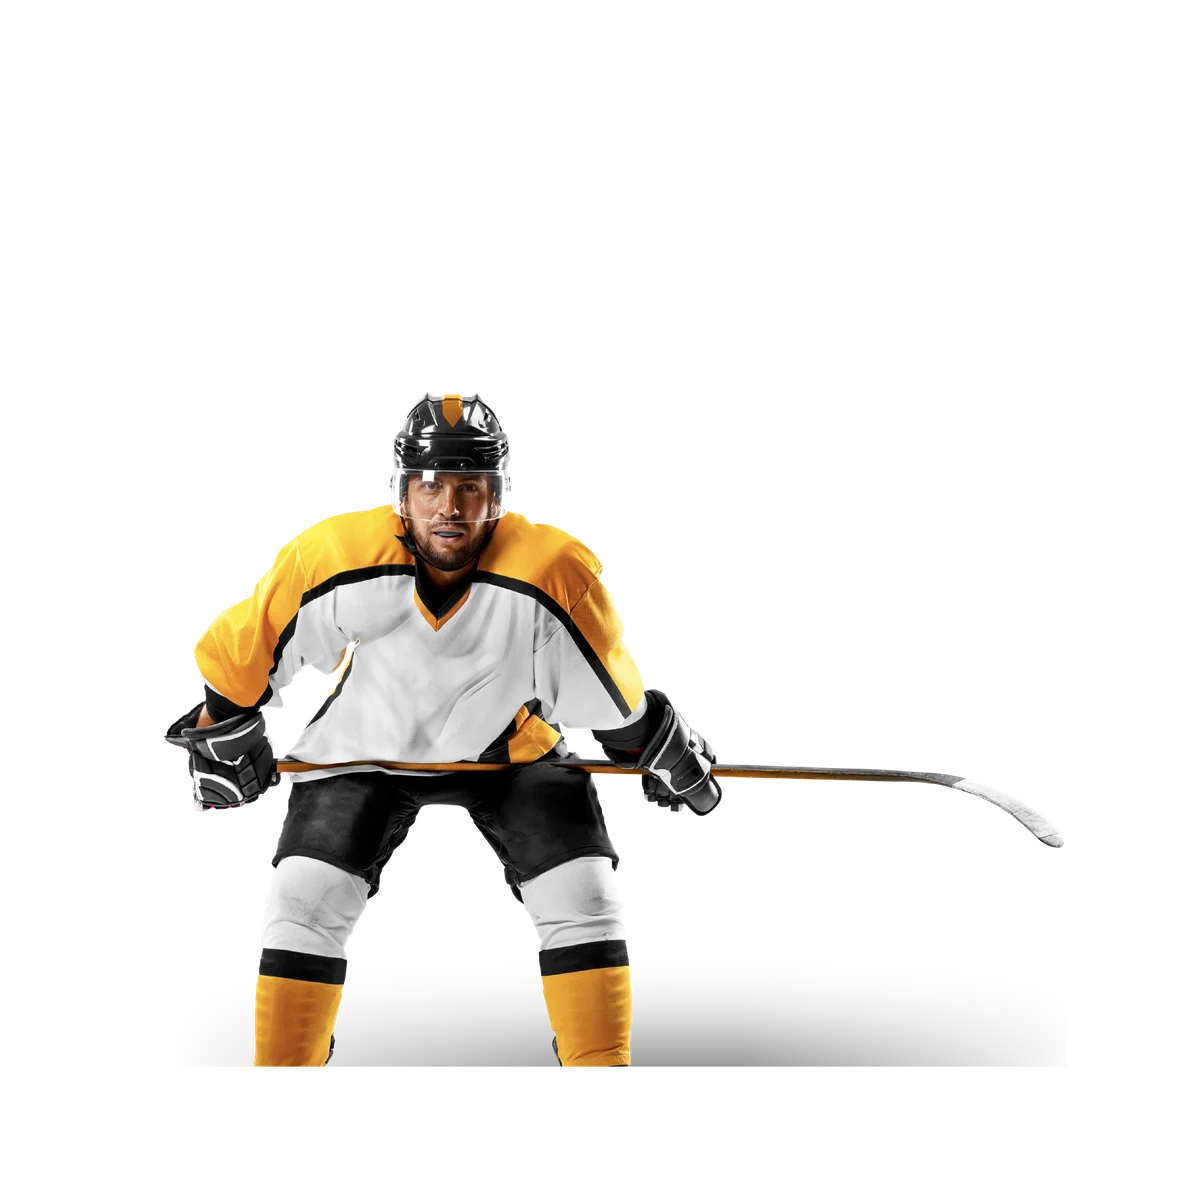 guy in hockey equipment with sports statistics behind him